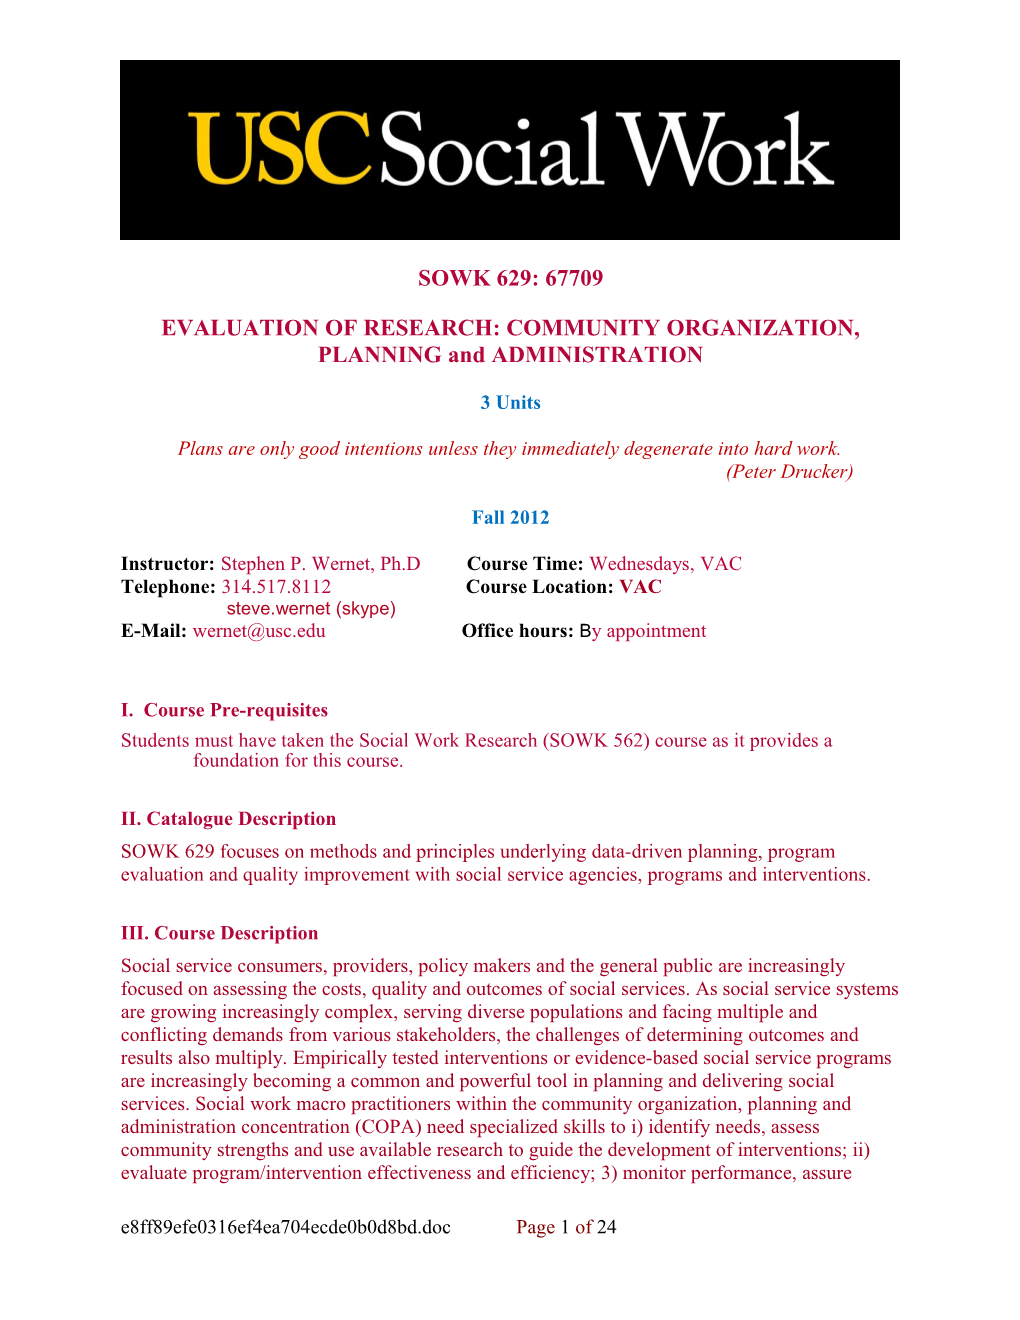 EVALUATION of RESEARCH: COMMUNITY ORGANIZATION, PLANNING and ADMINISTRATION